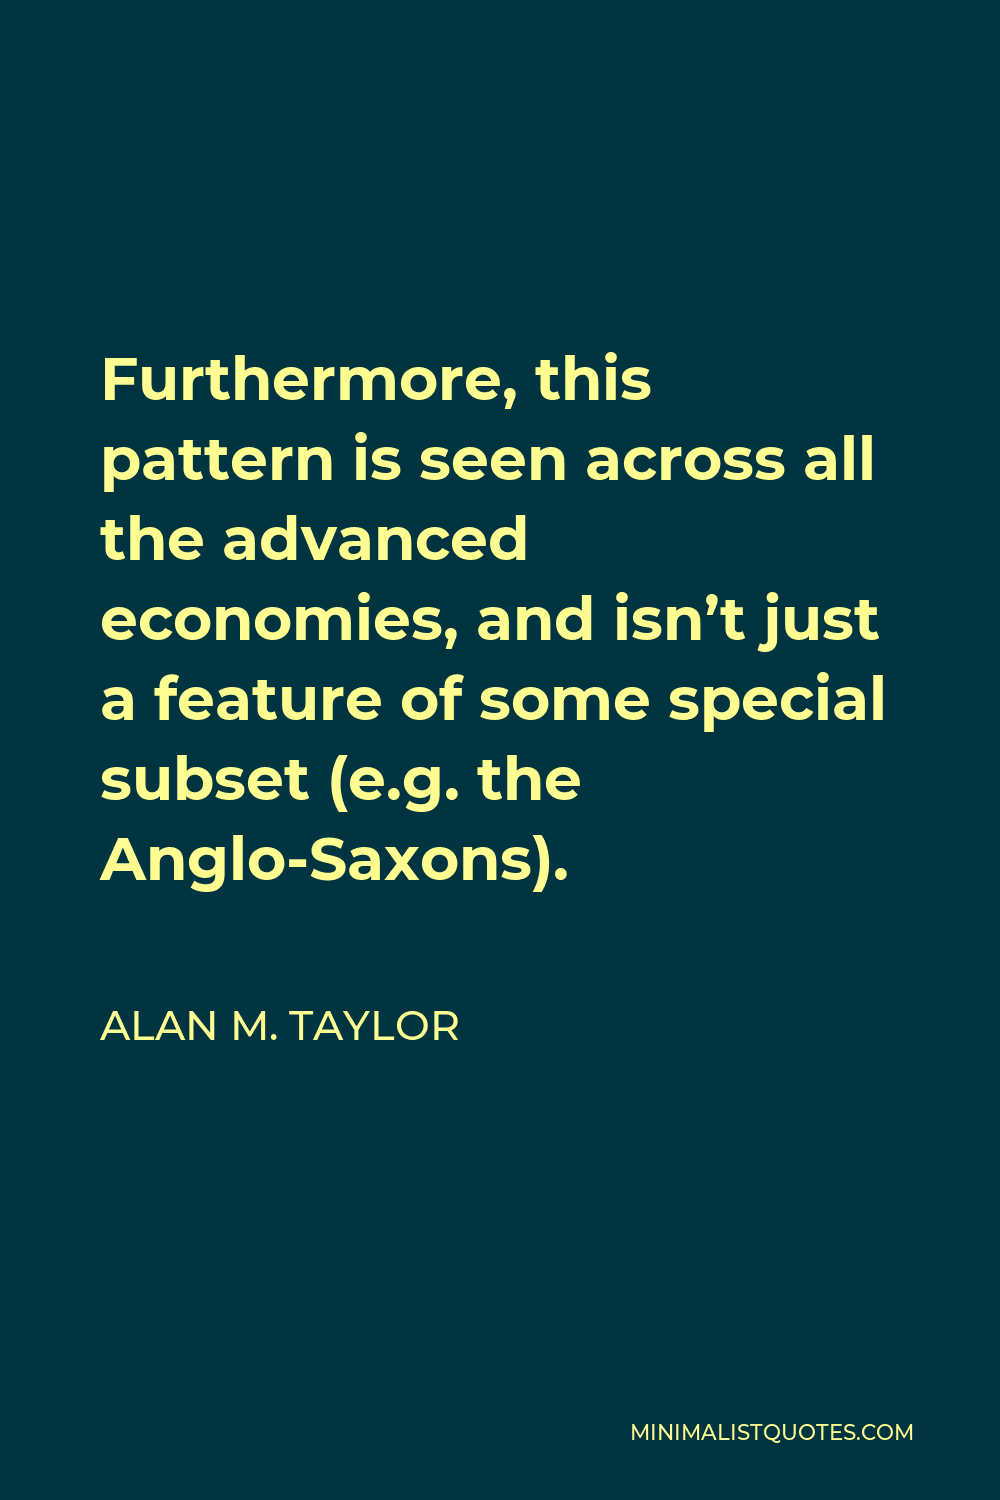 Alan M. Taylor Quote - Furthermore, this pattern is seen across all the advanced economies, and isn’t just a feature of some special subset (e.g. the Anglo-Saxons).